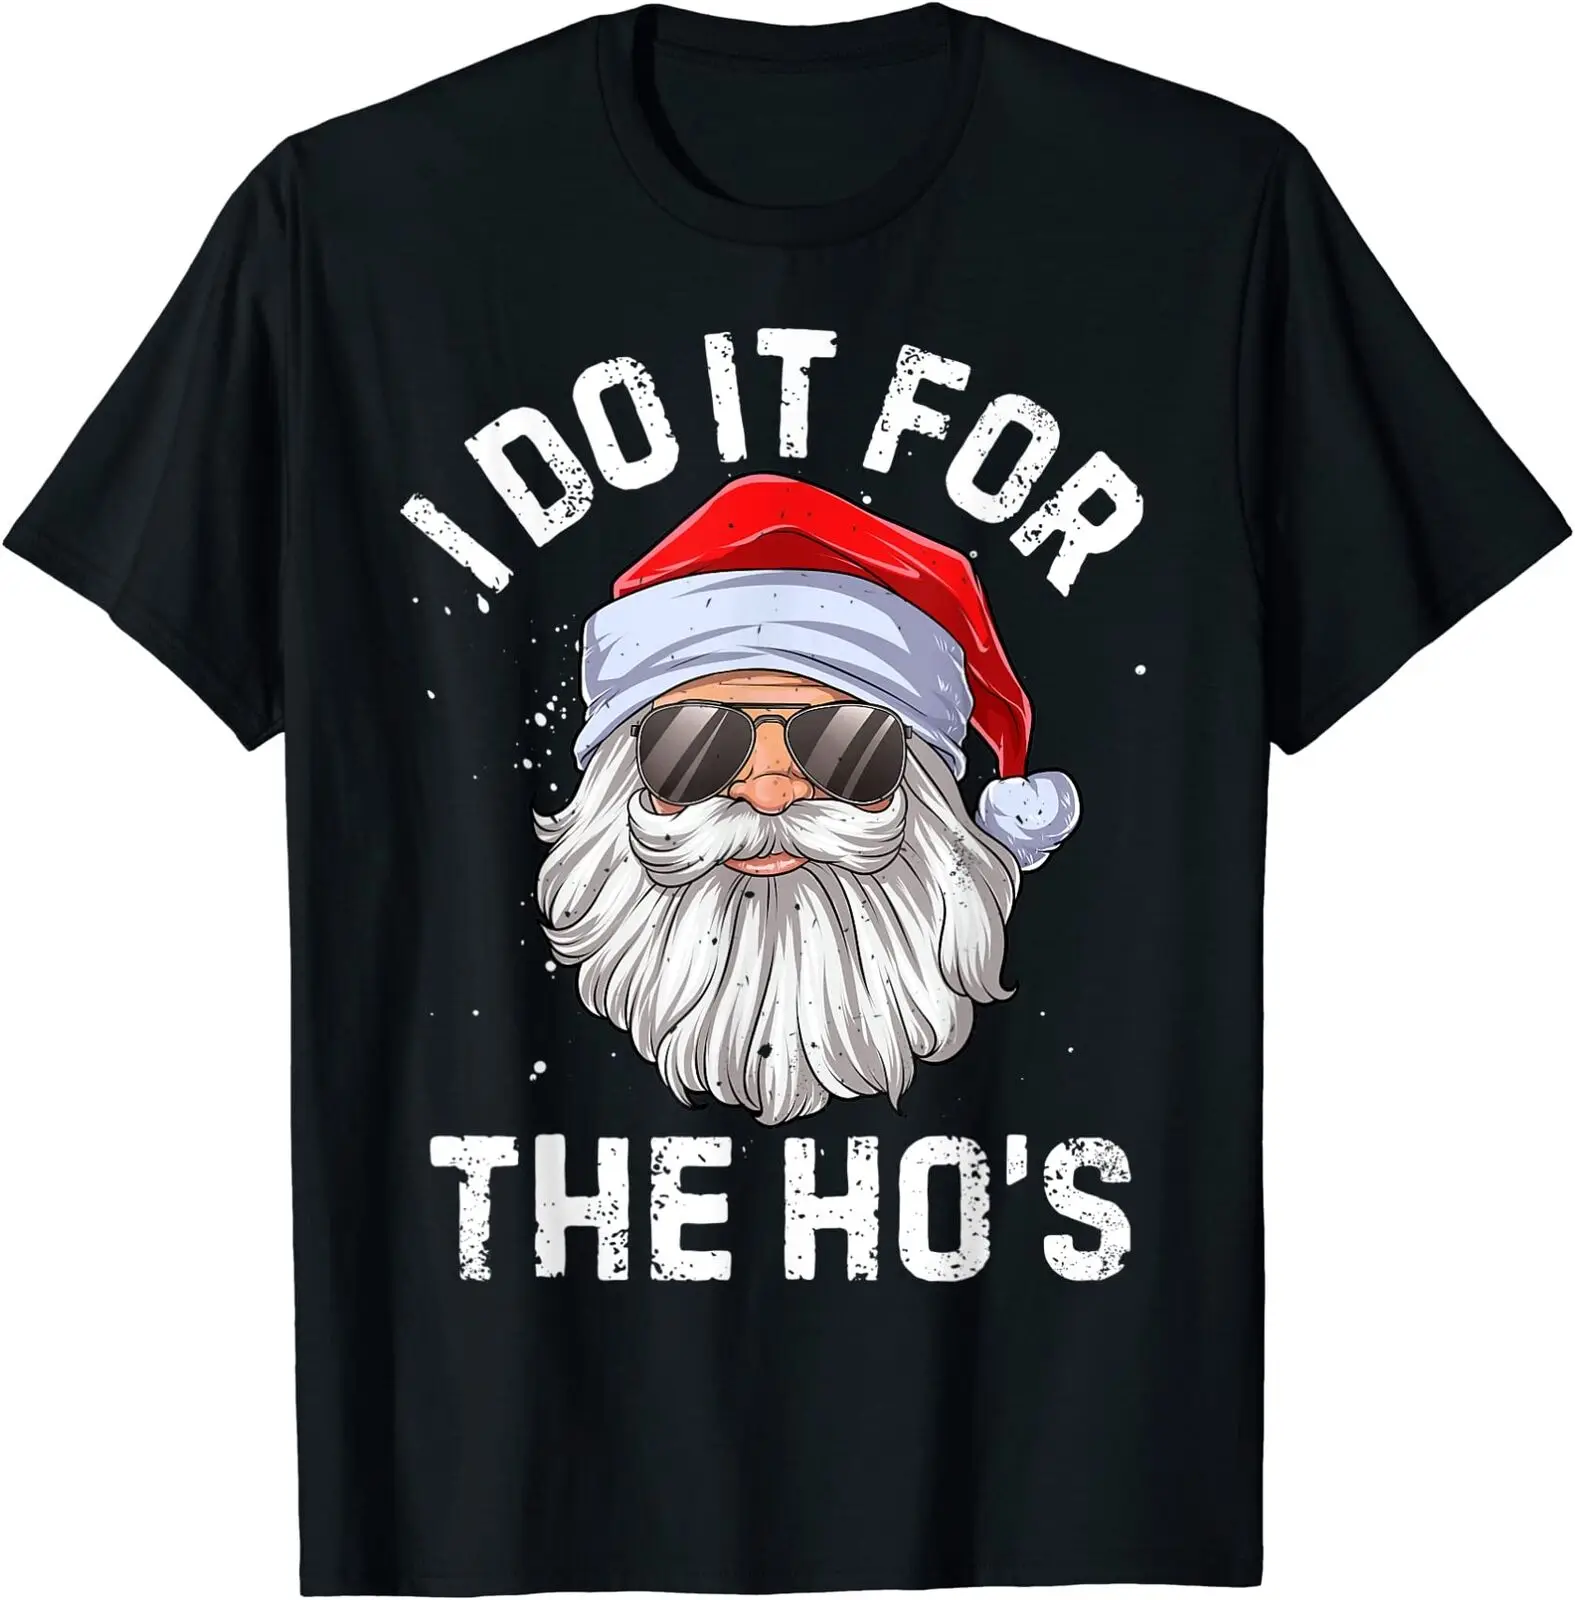 

I Do It For The Hos Funny Inappropriate O-Neck Cotton T Shirt Men Casual Short Sleeve Tees Tops Harajuku Streetwear